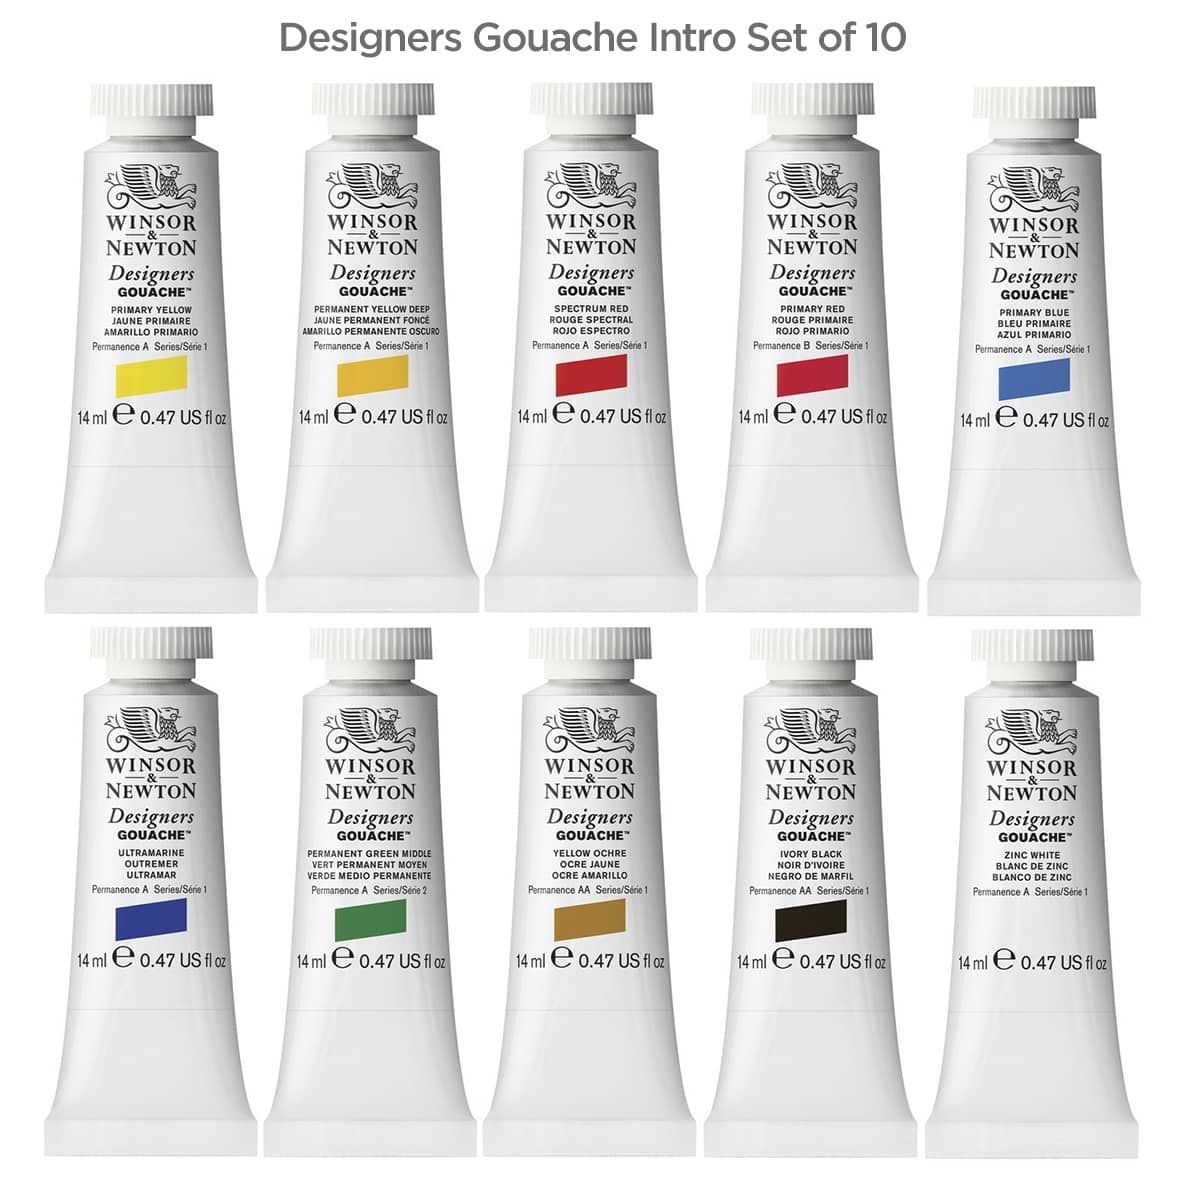 Winsor & Newton Designers Introductory Set of 10